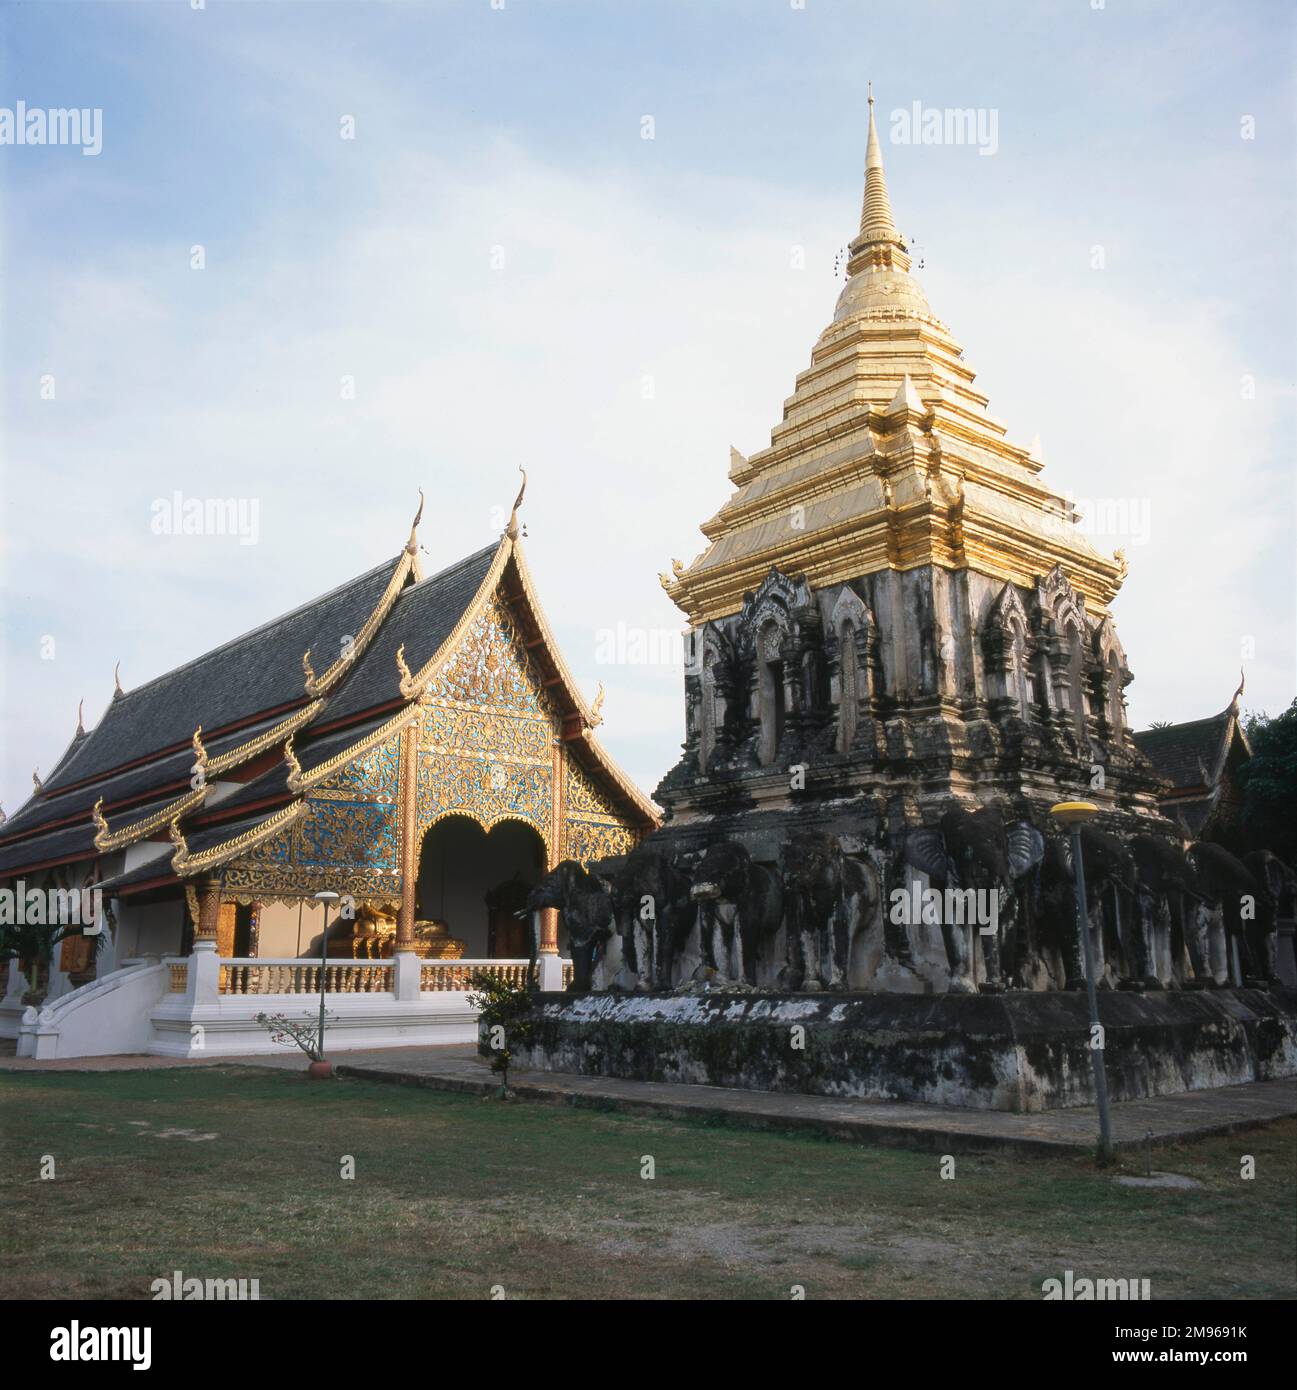 View of two buildings of Wat Chiang Man, the oldest temple in Chiang Mai, Thailand.  Construction of the temple began in the late 13th or early 14th century. Stock Photo